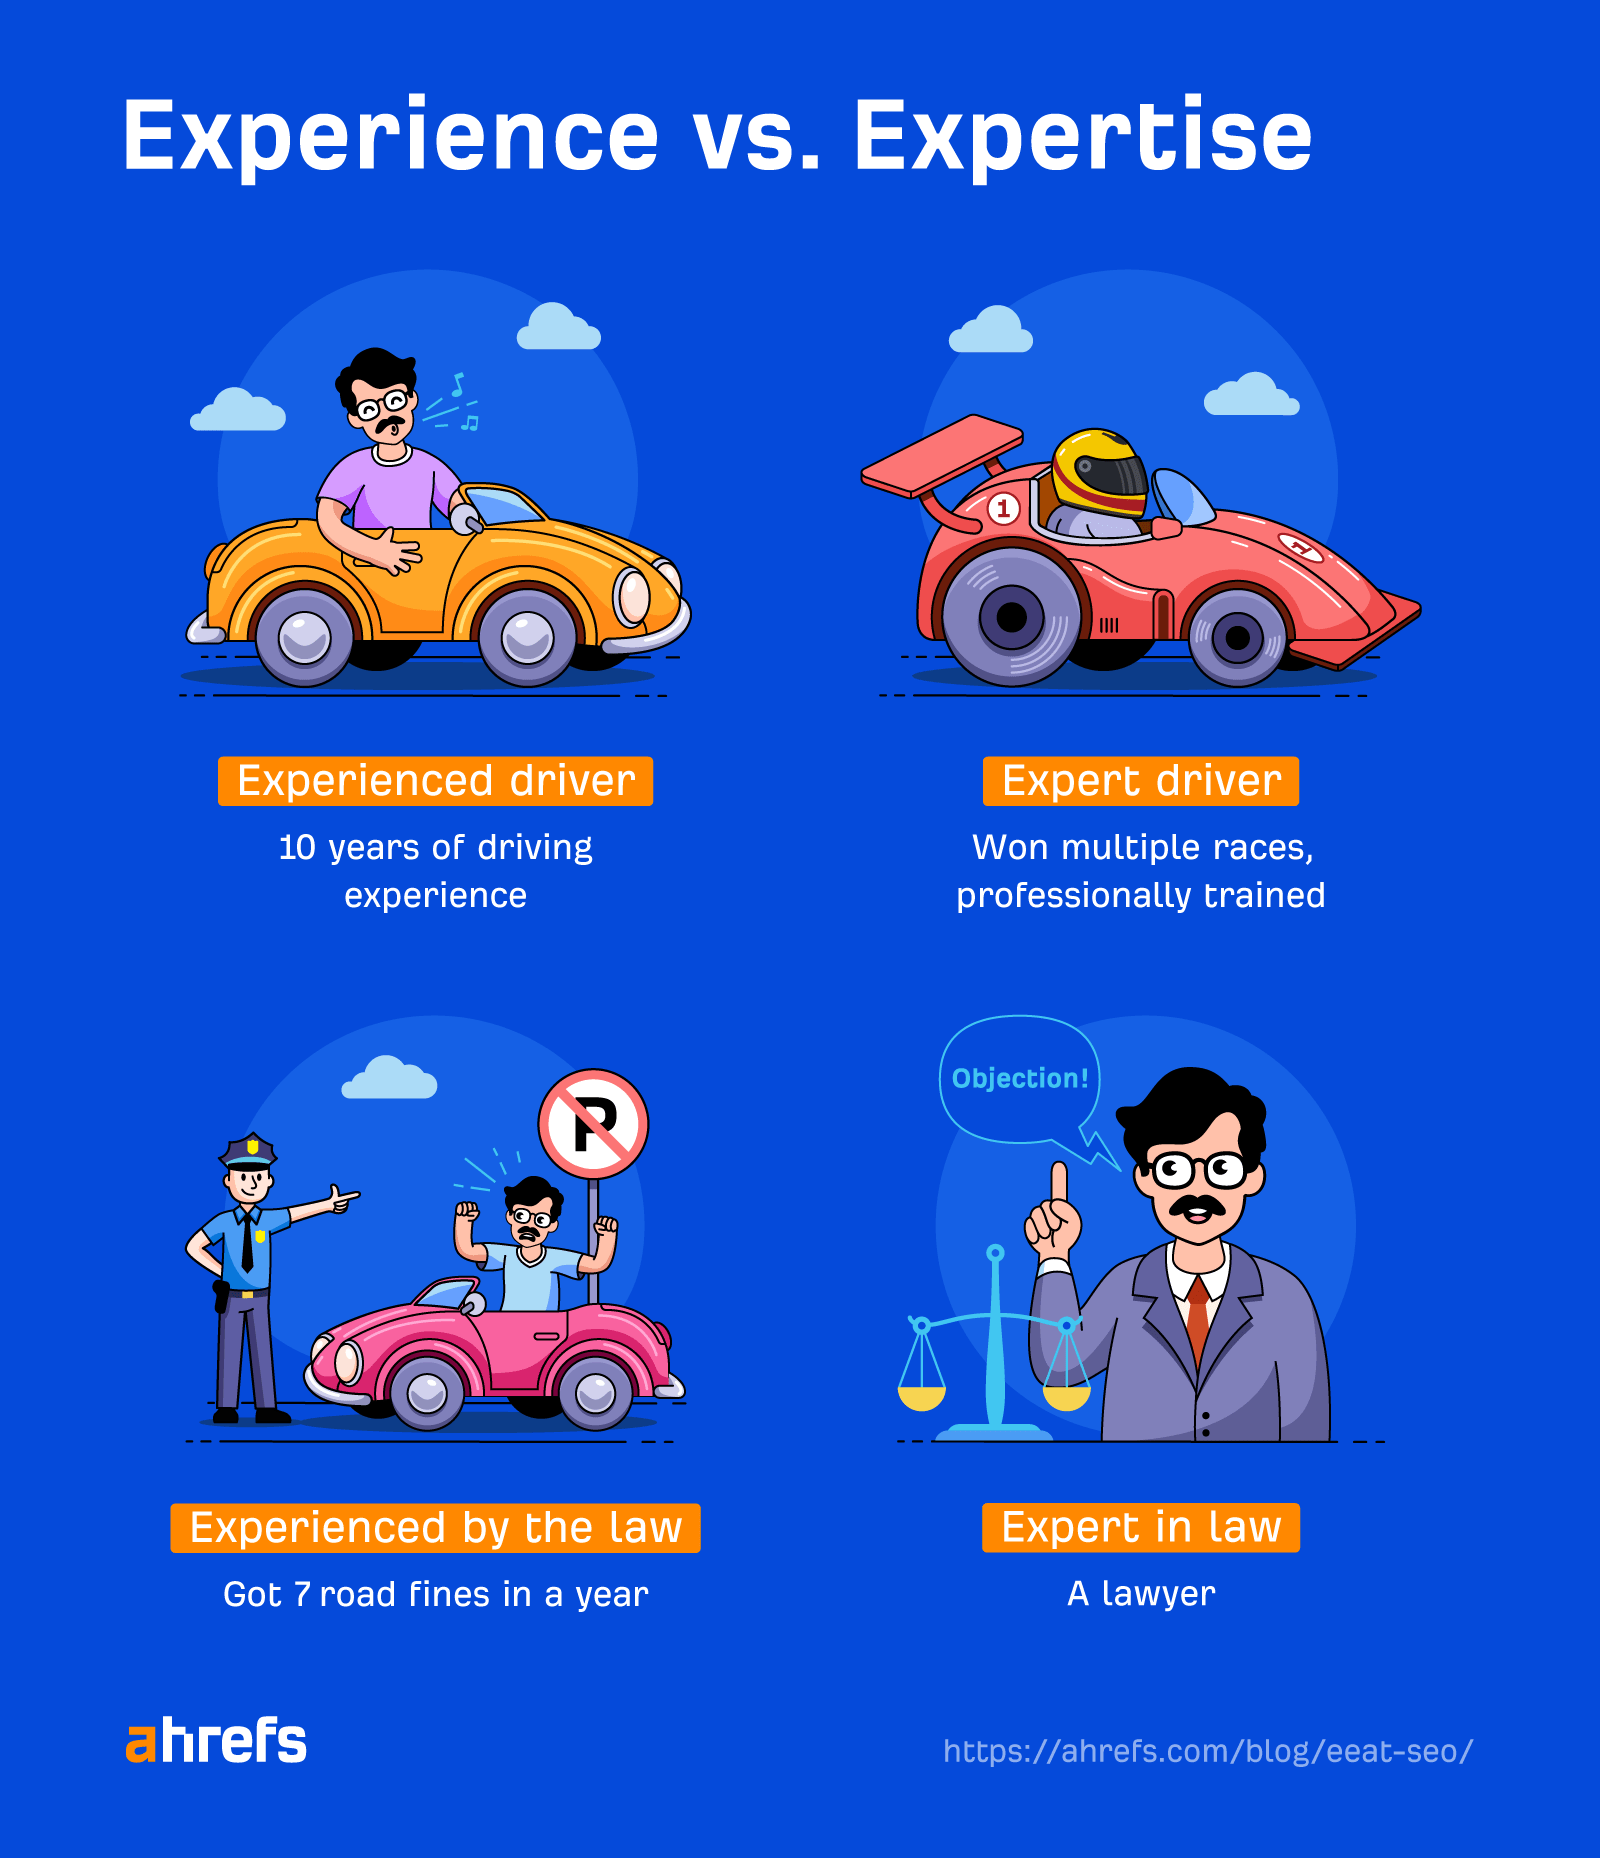 Experience vs. expertise